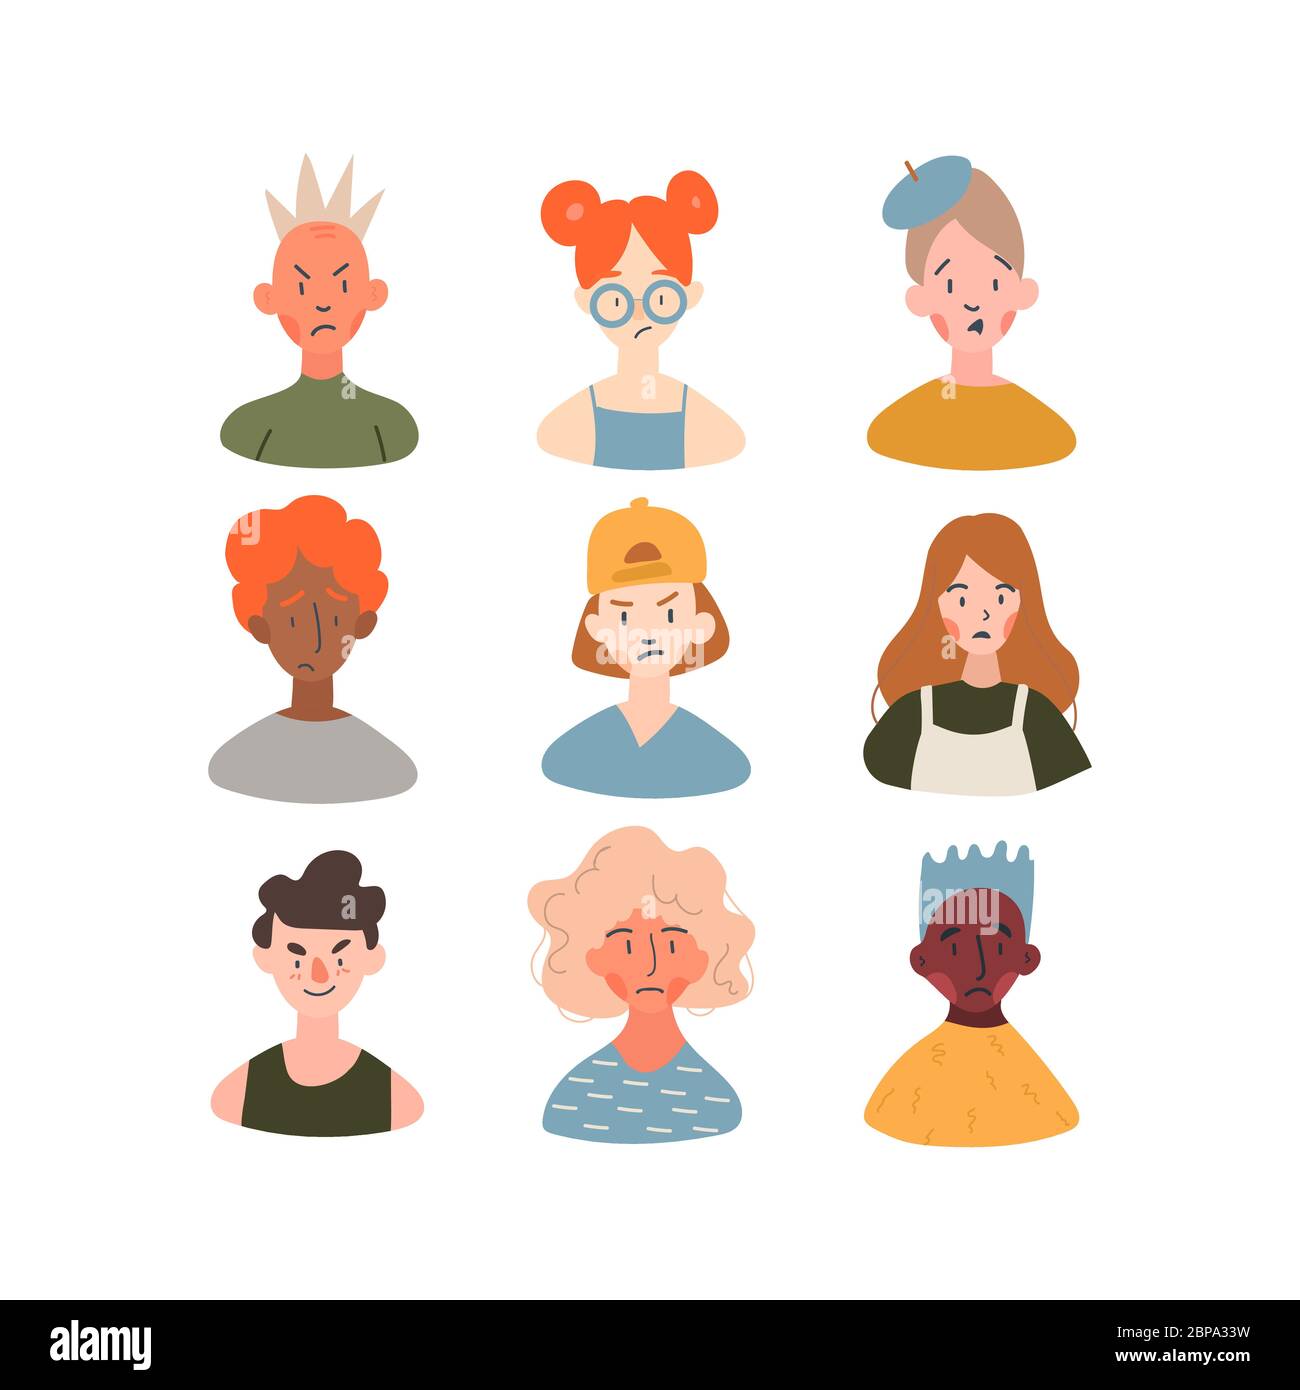 Children of different races profile avatars collection. Icons of girl’s and boy’s faces icon vector illustration set. Modern cartoon flat design. Onli Stock Vector